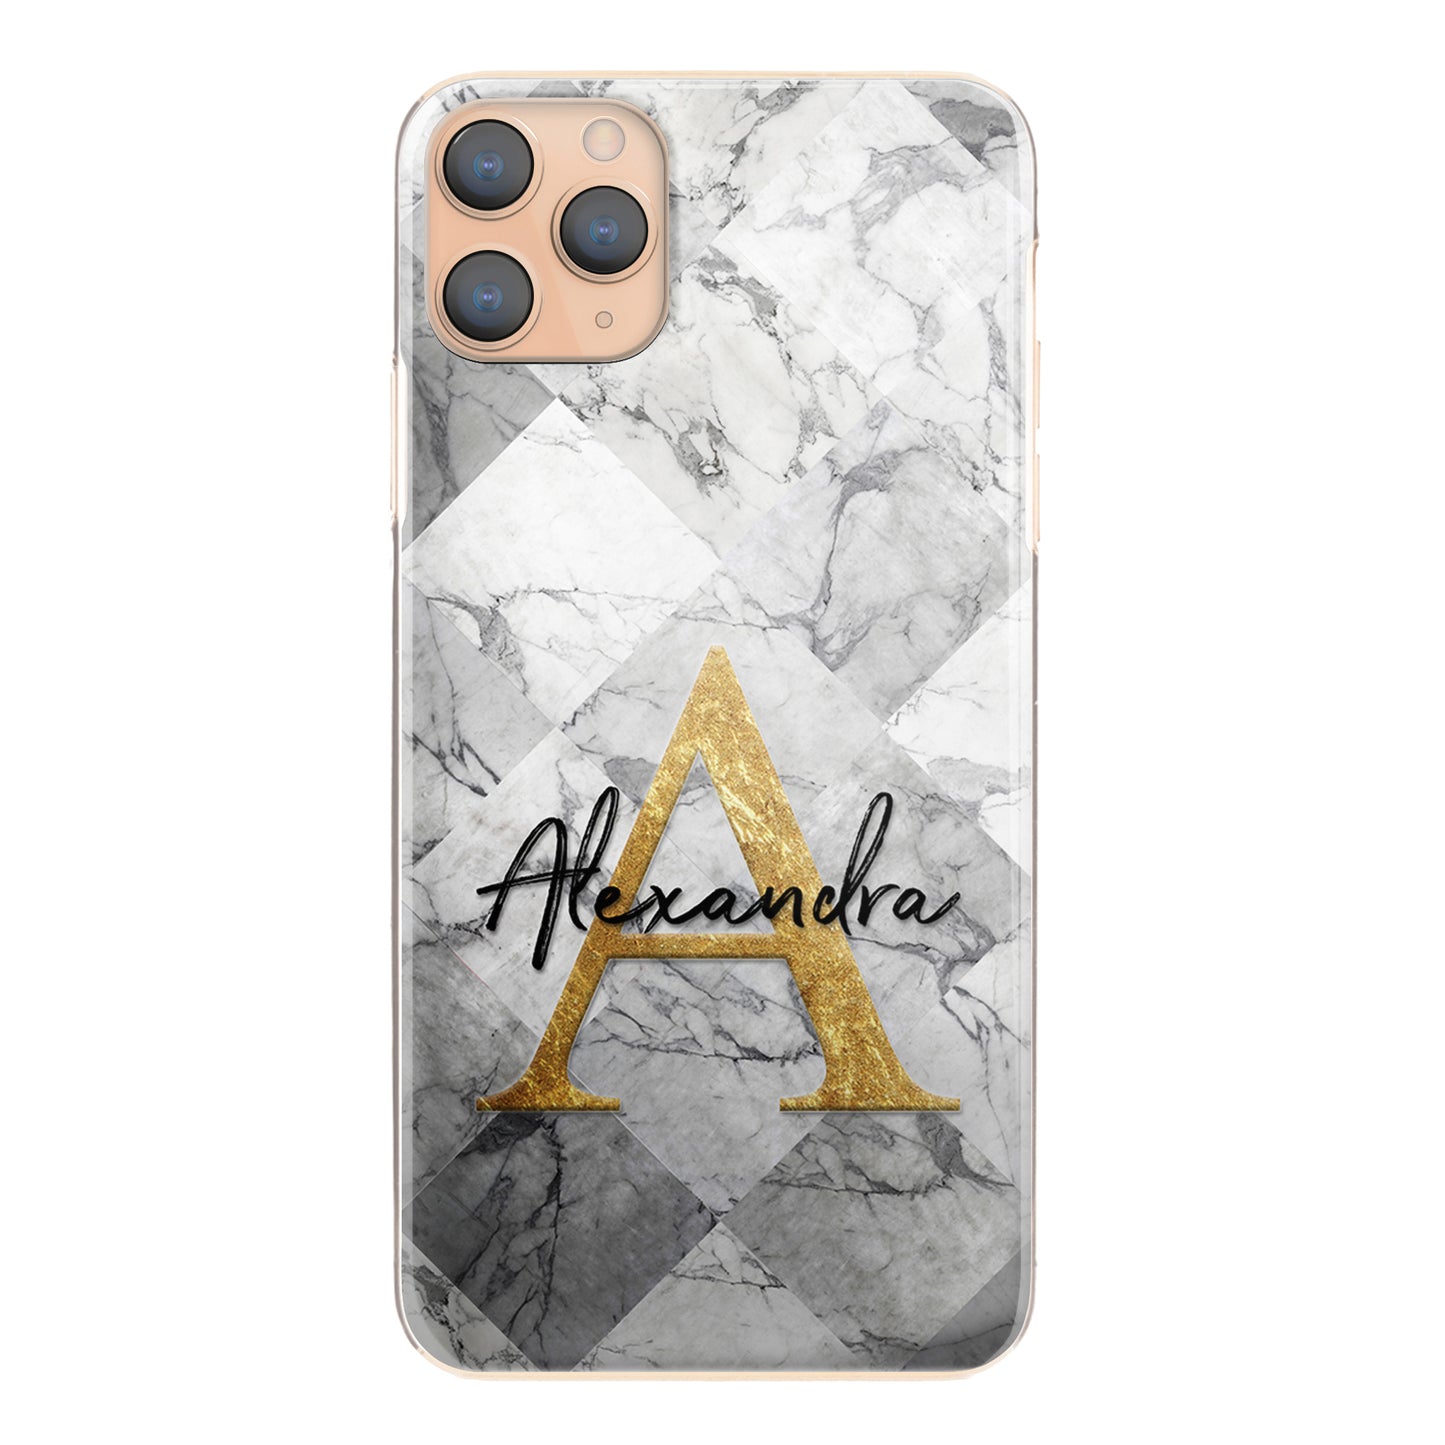 Personalised Apple iPhone Hard Case with Gold Monogram and Stylish Text on Patterned Grey Marble